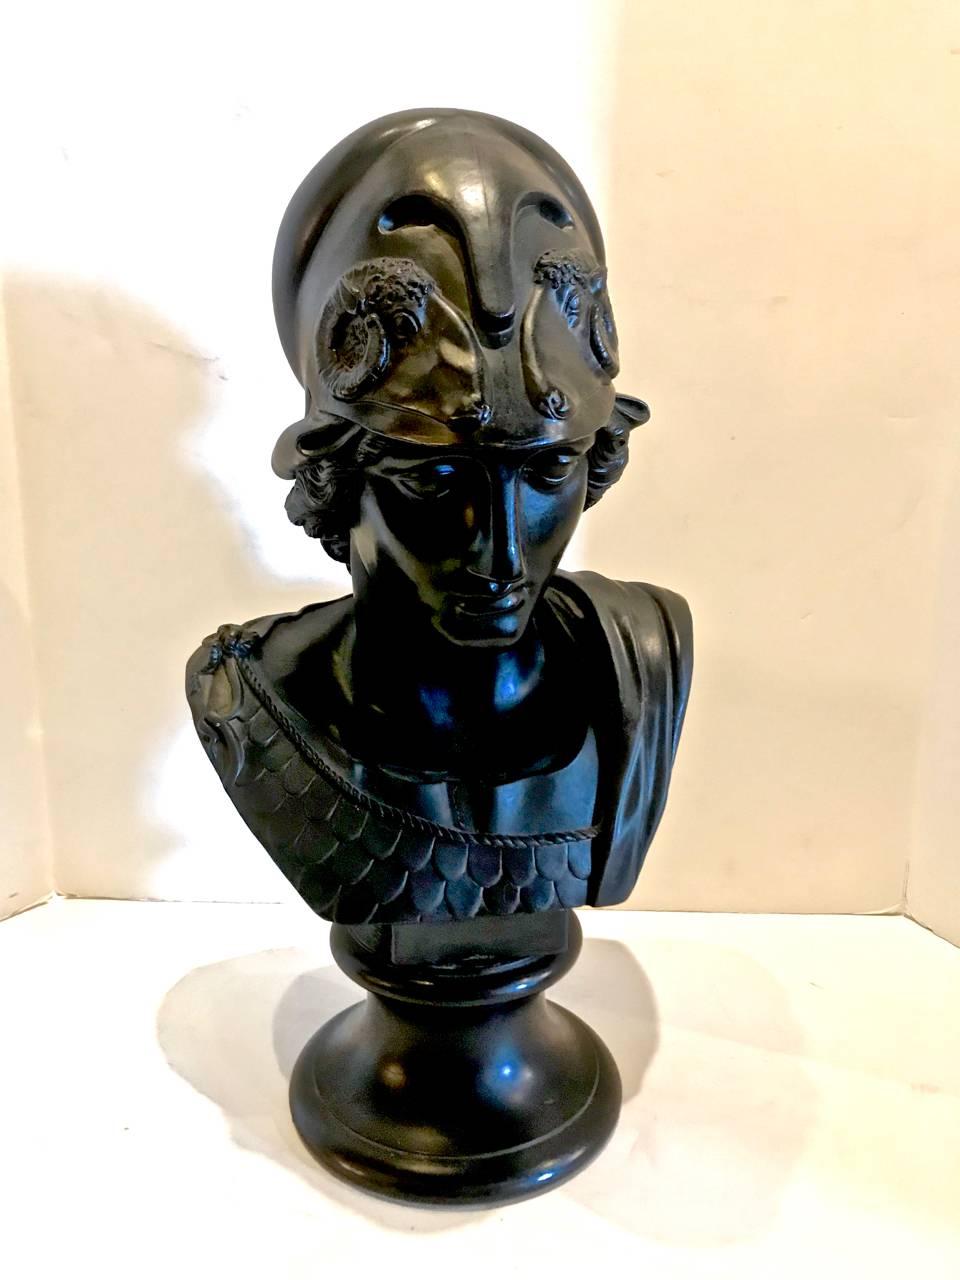 This is a stunning neoclassical Wedgwood Basalt Bust of Minerva that dates to the second half of the 19th century. The bust is in excellent condition with no observed restorations. Note the impressed Wedgwood and title marks in detail photos. This